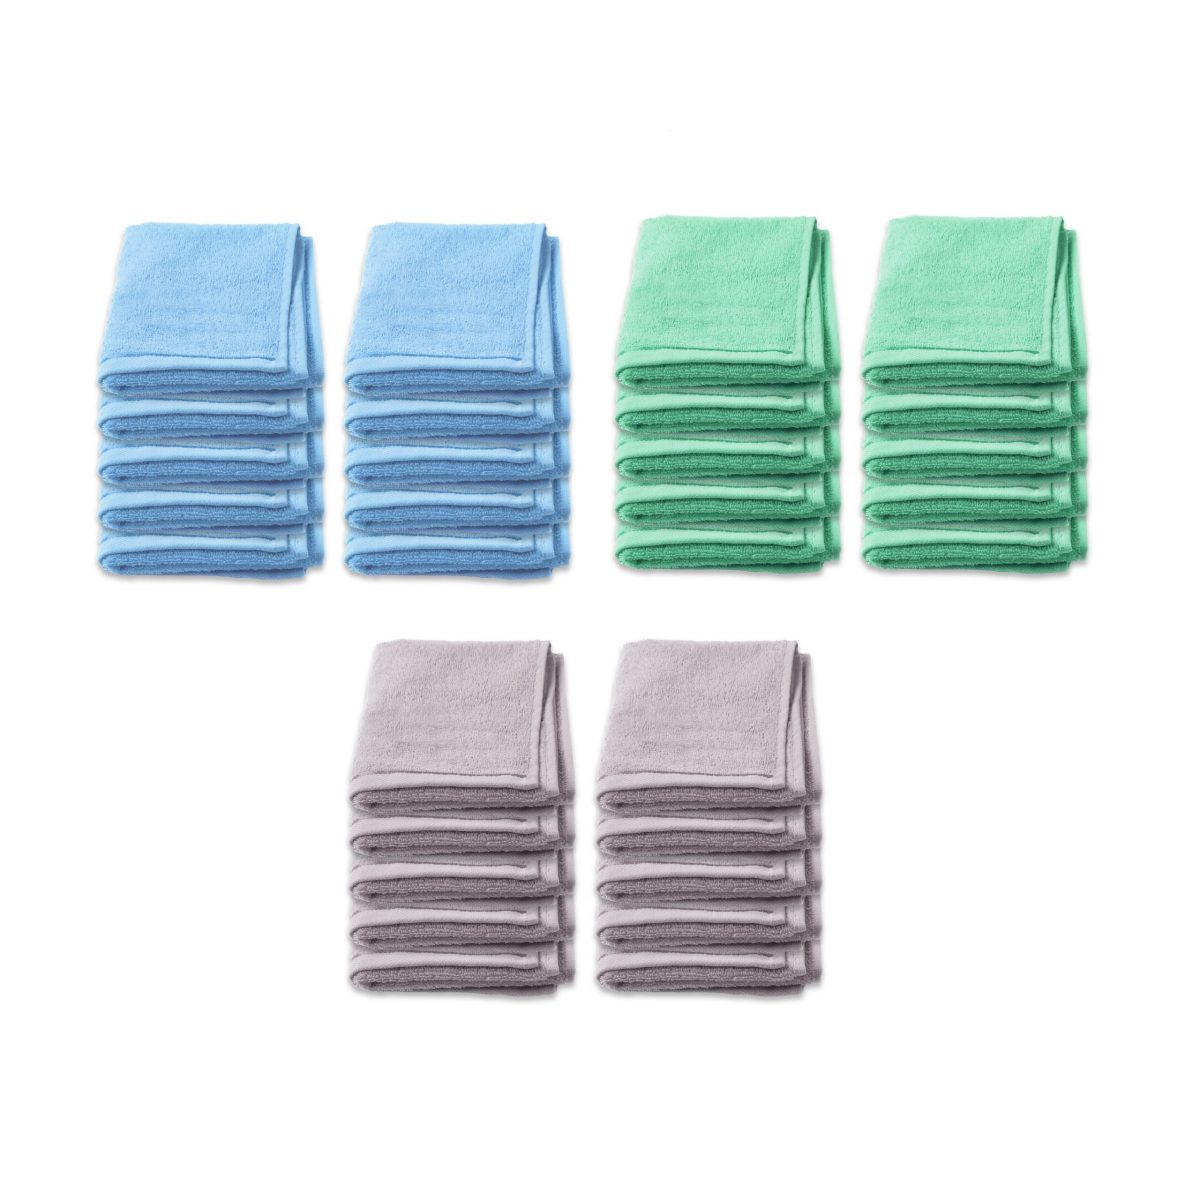 SP Face Washers (10 Pack)